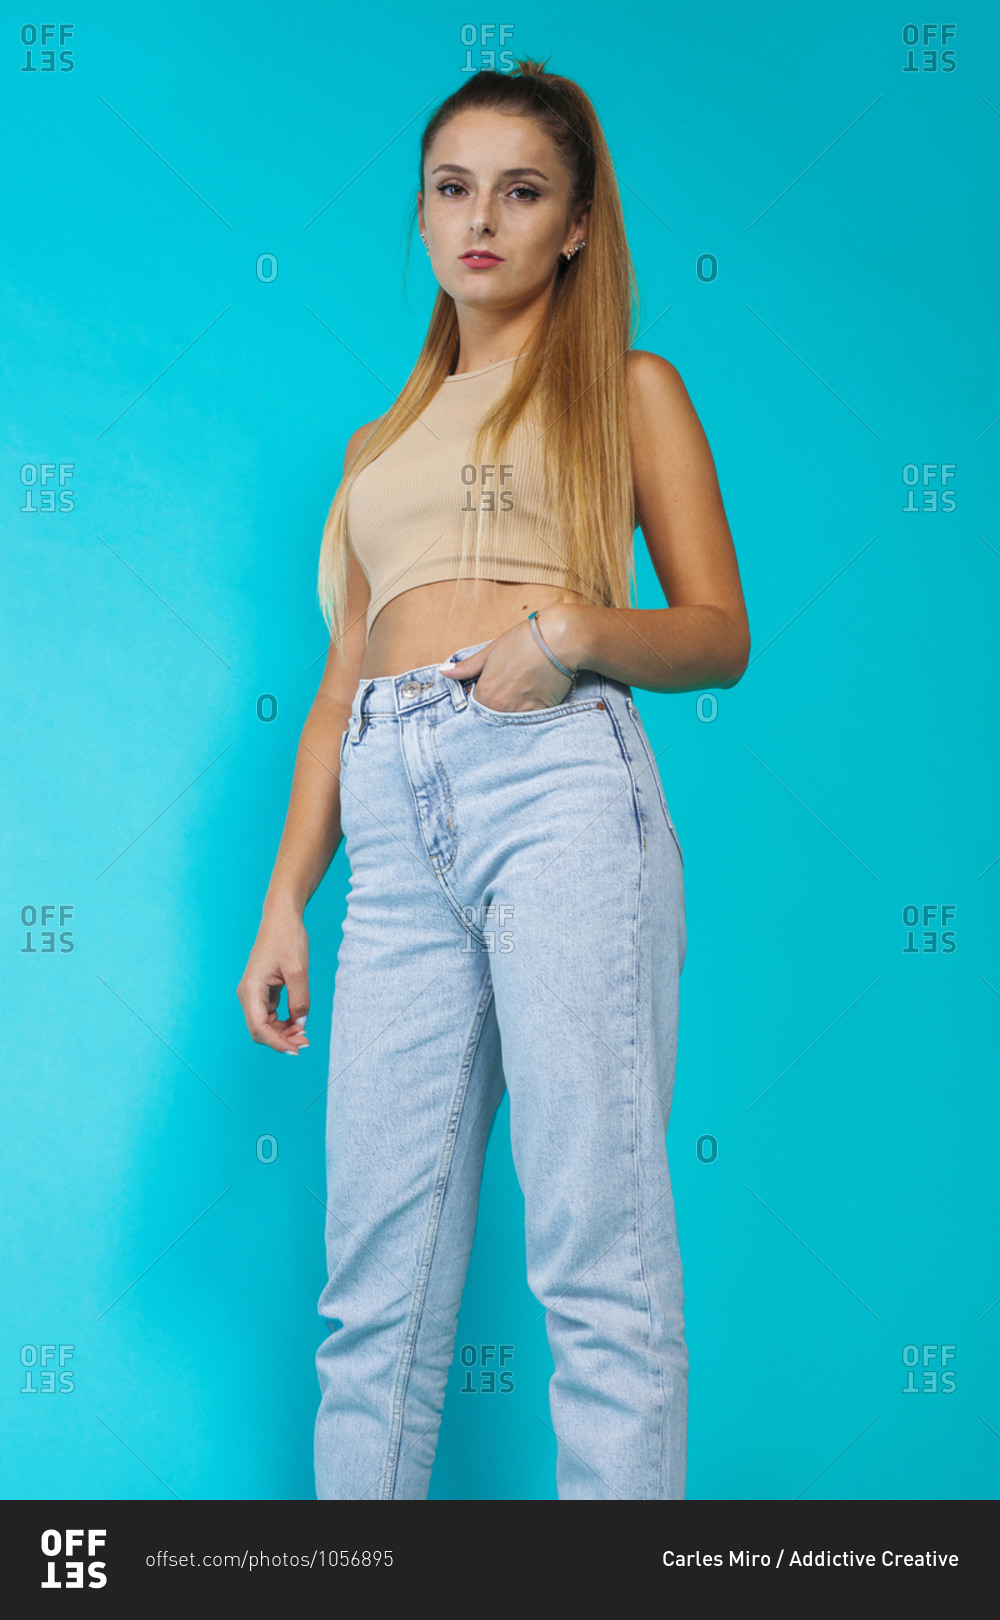 Low angle of confident slim teen female model in cropped top and trendy jeans looking at camera against blue background